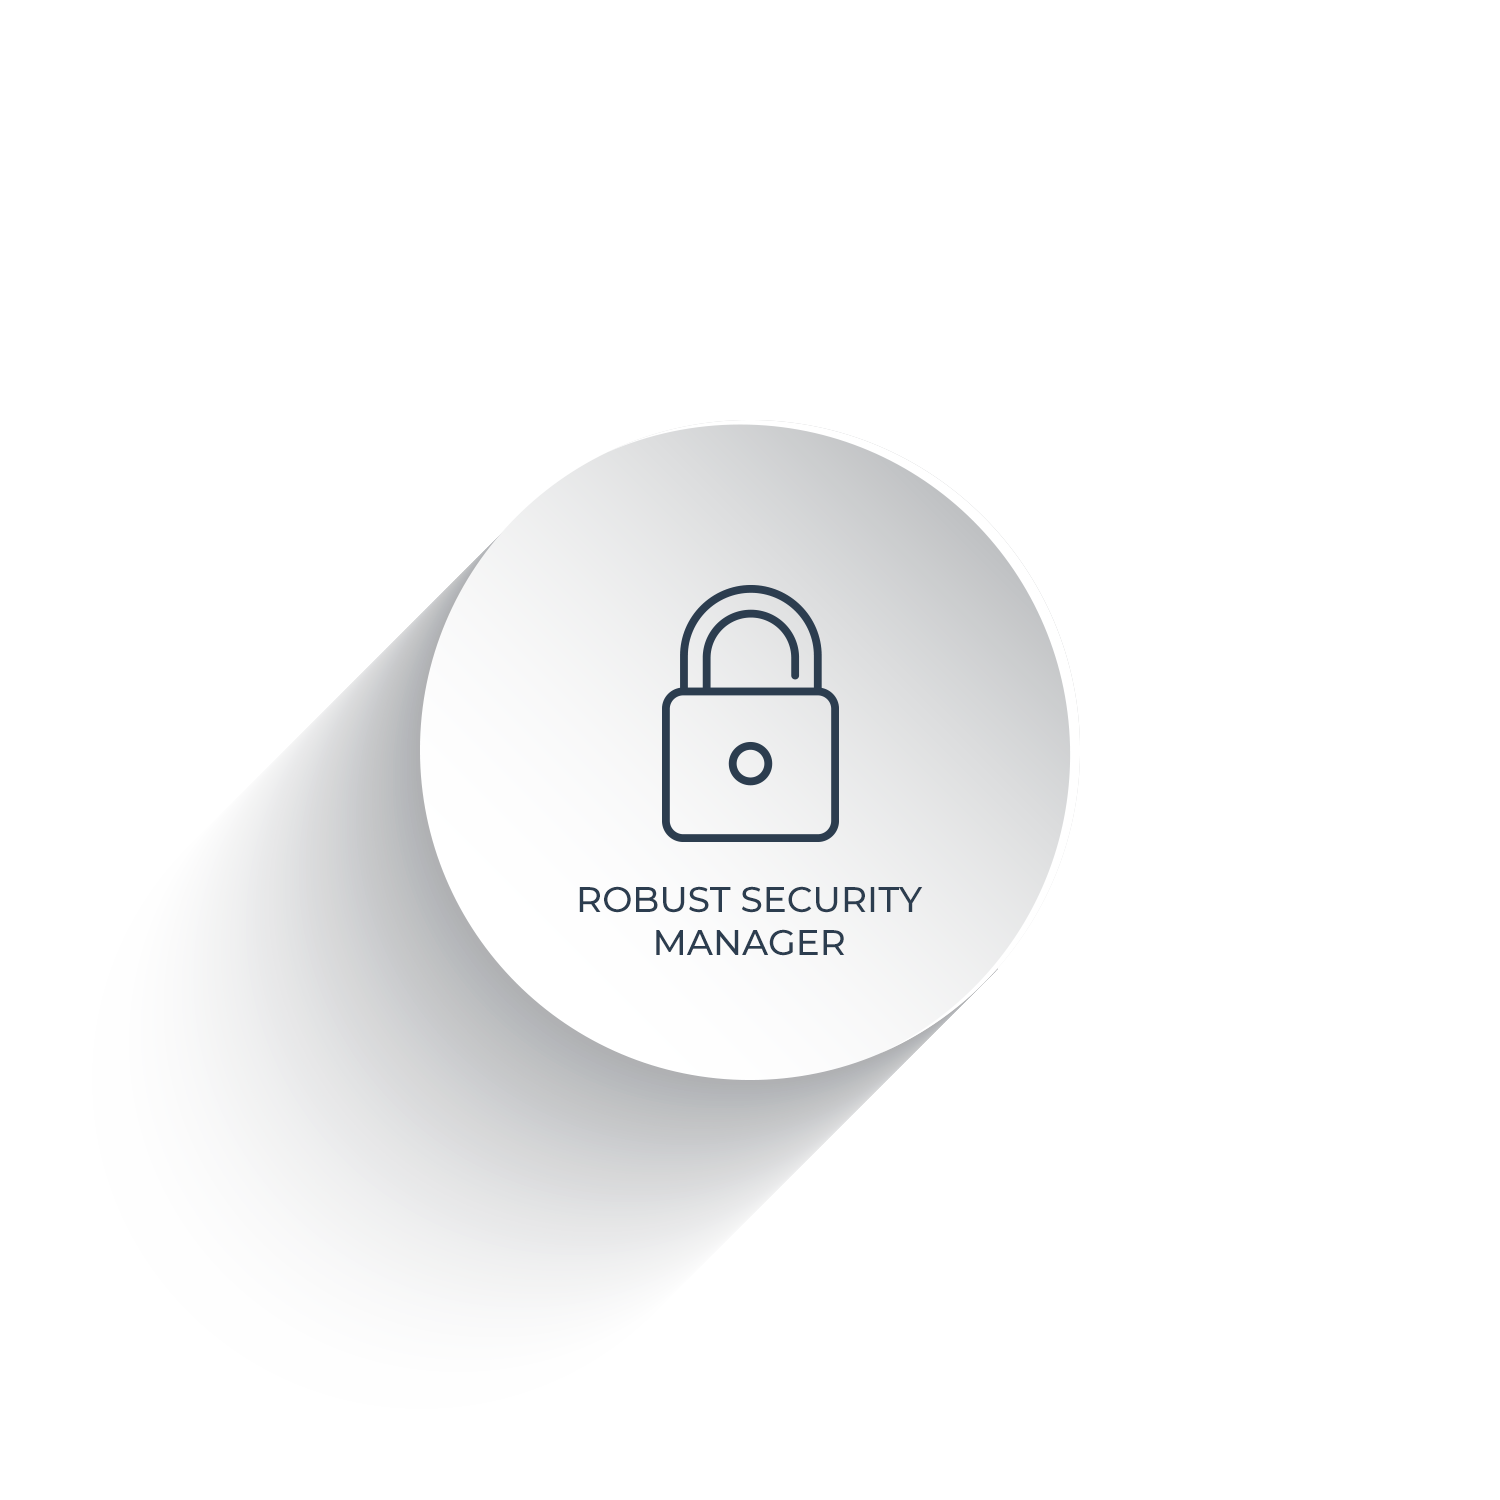 Robost Security Manager